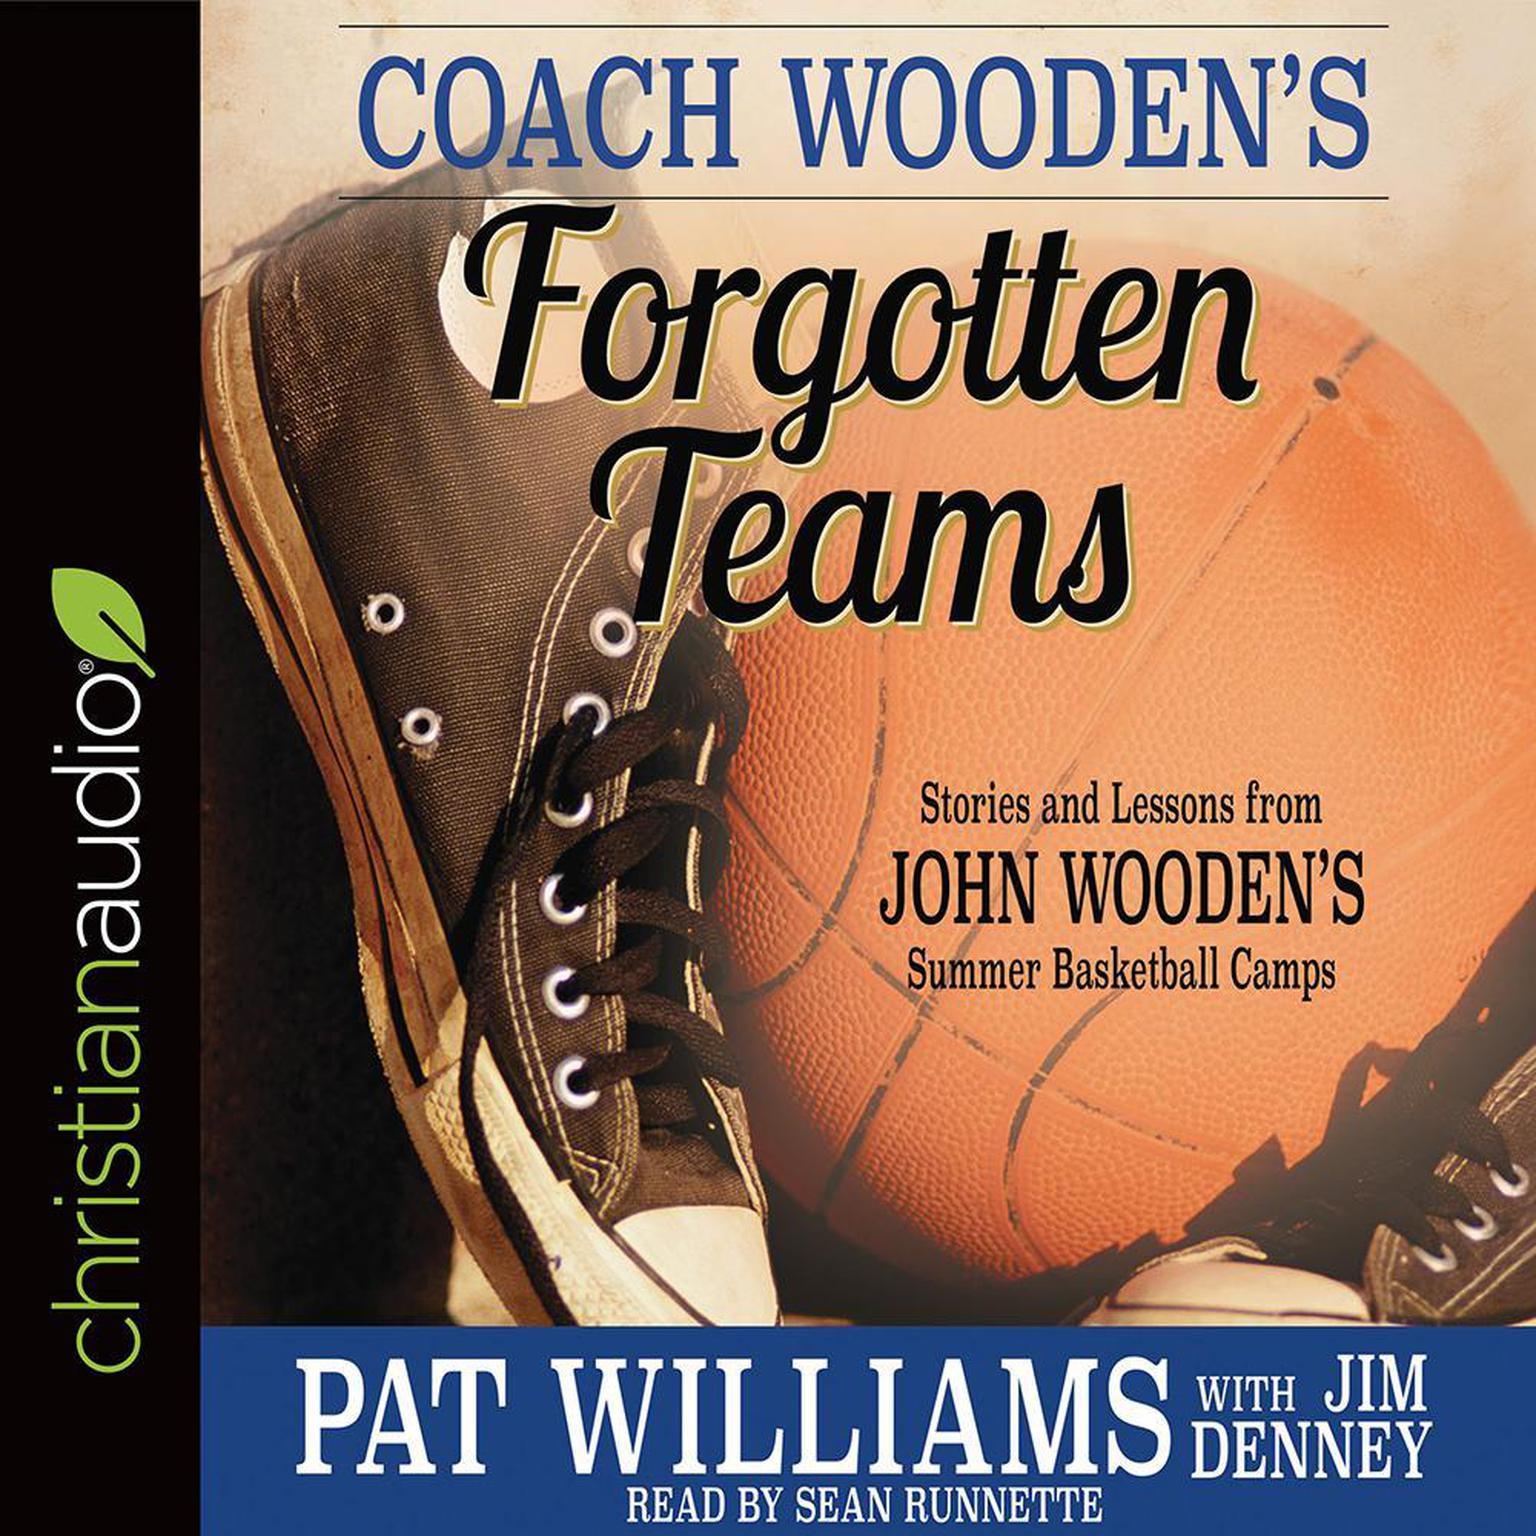 Coach Woodens Forgotten Teams: Stories and Lessons from John Woodens Summer Basketball Camps Audiobook, by Pat Williams